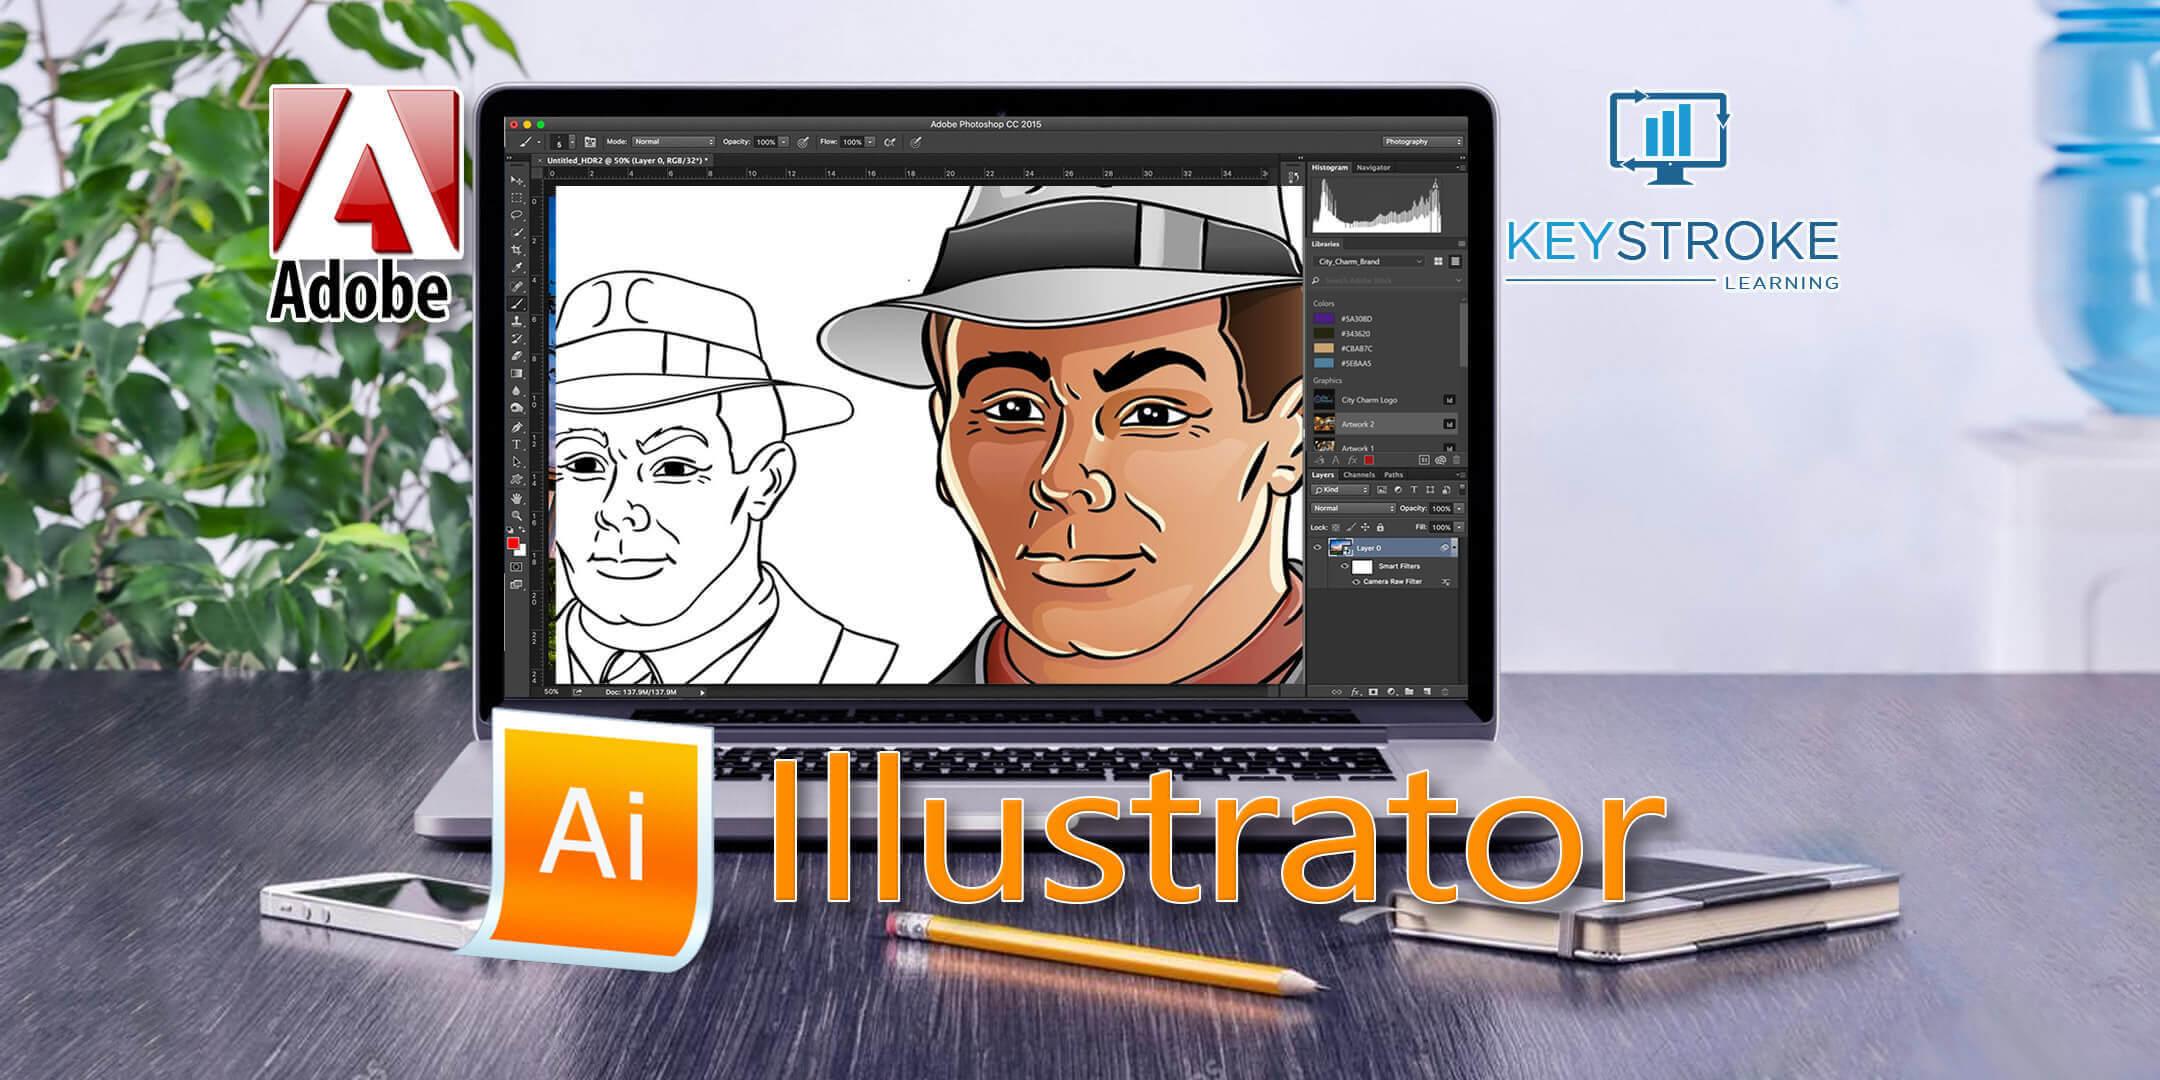 Live Online - Getting Started with Adobe Illustrator